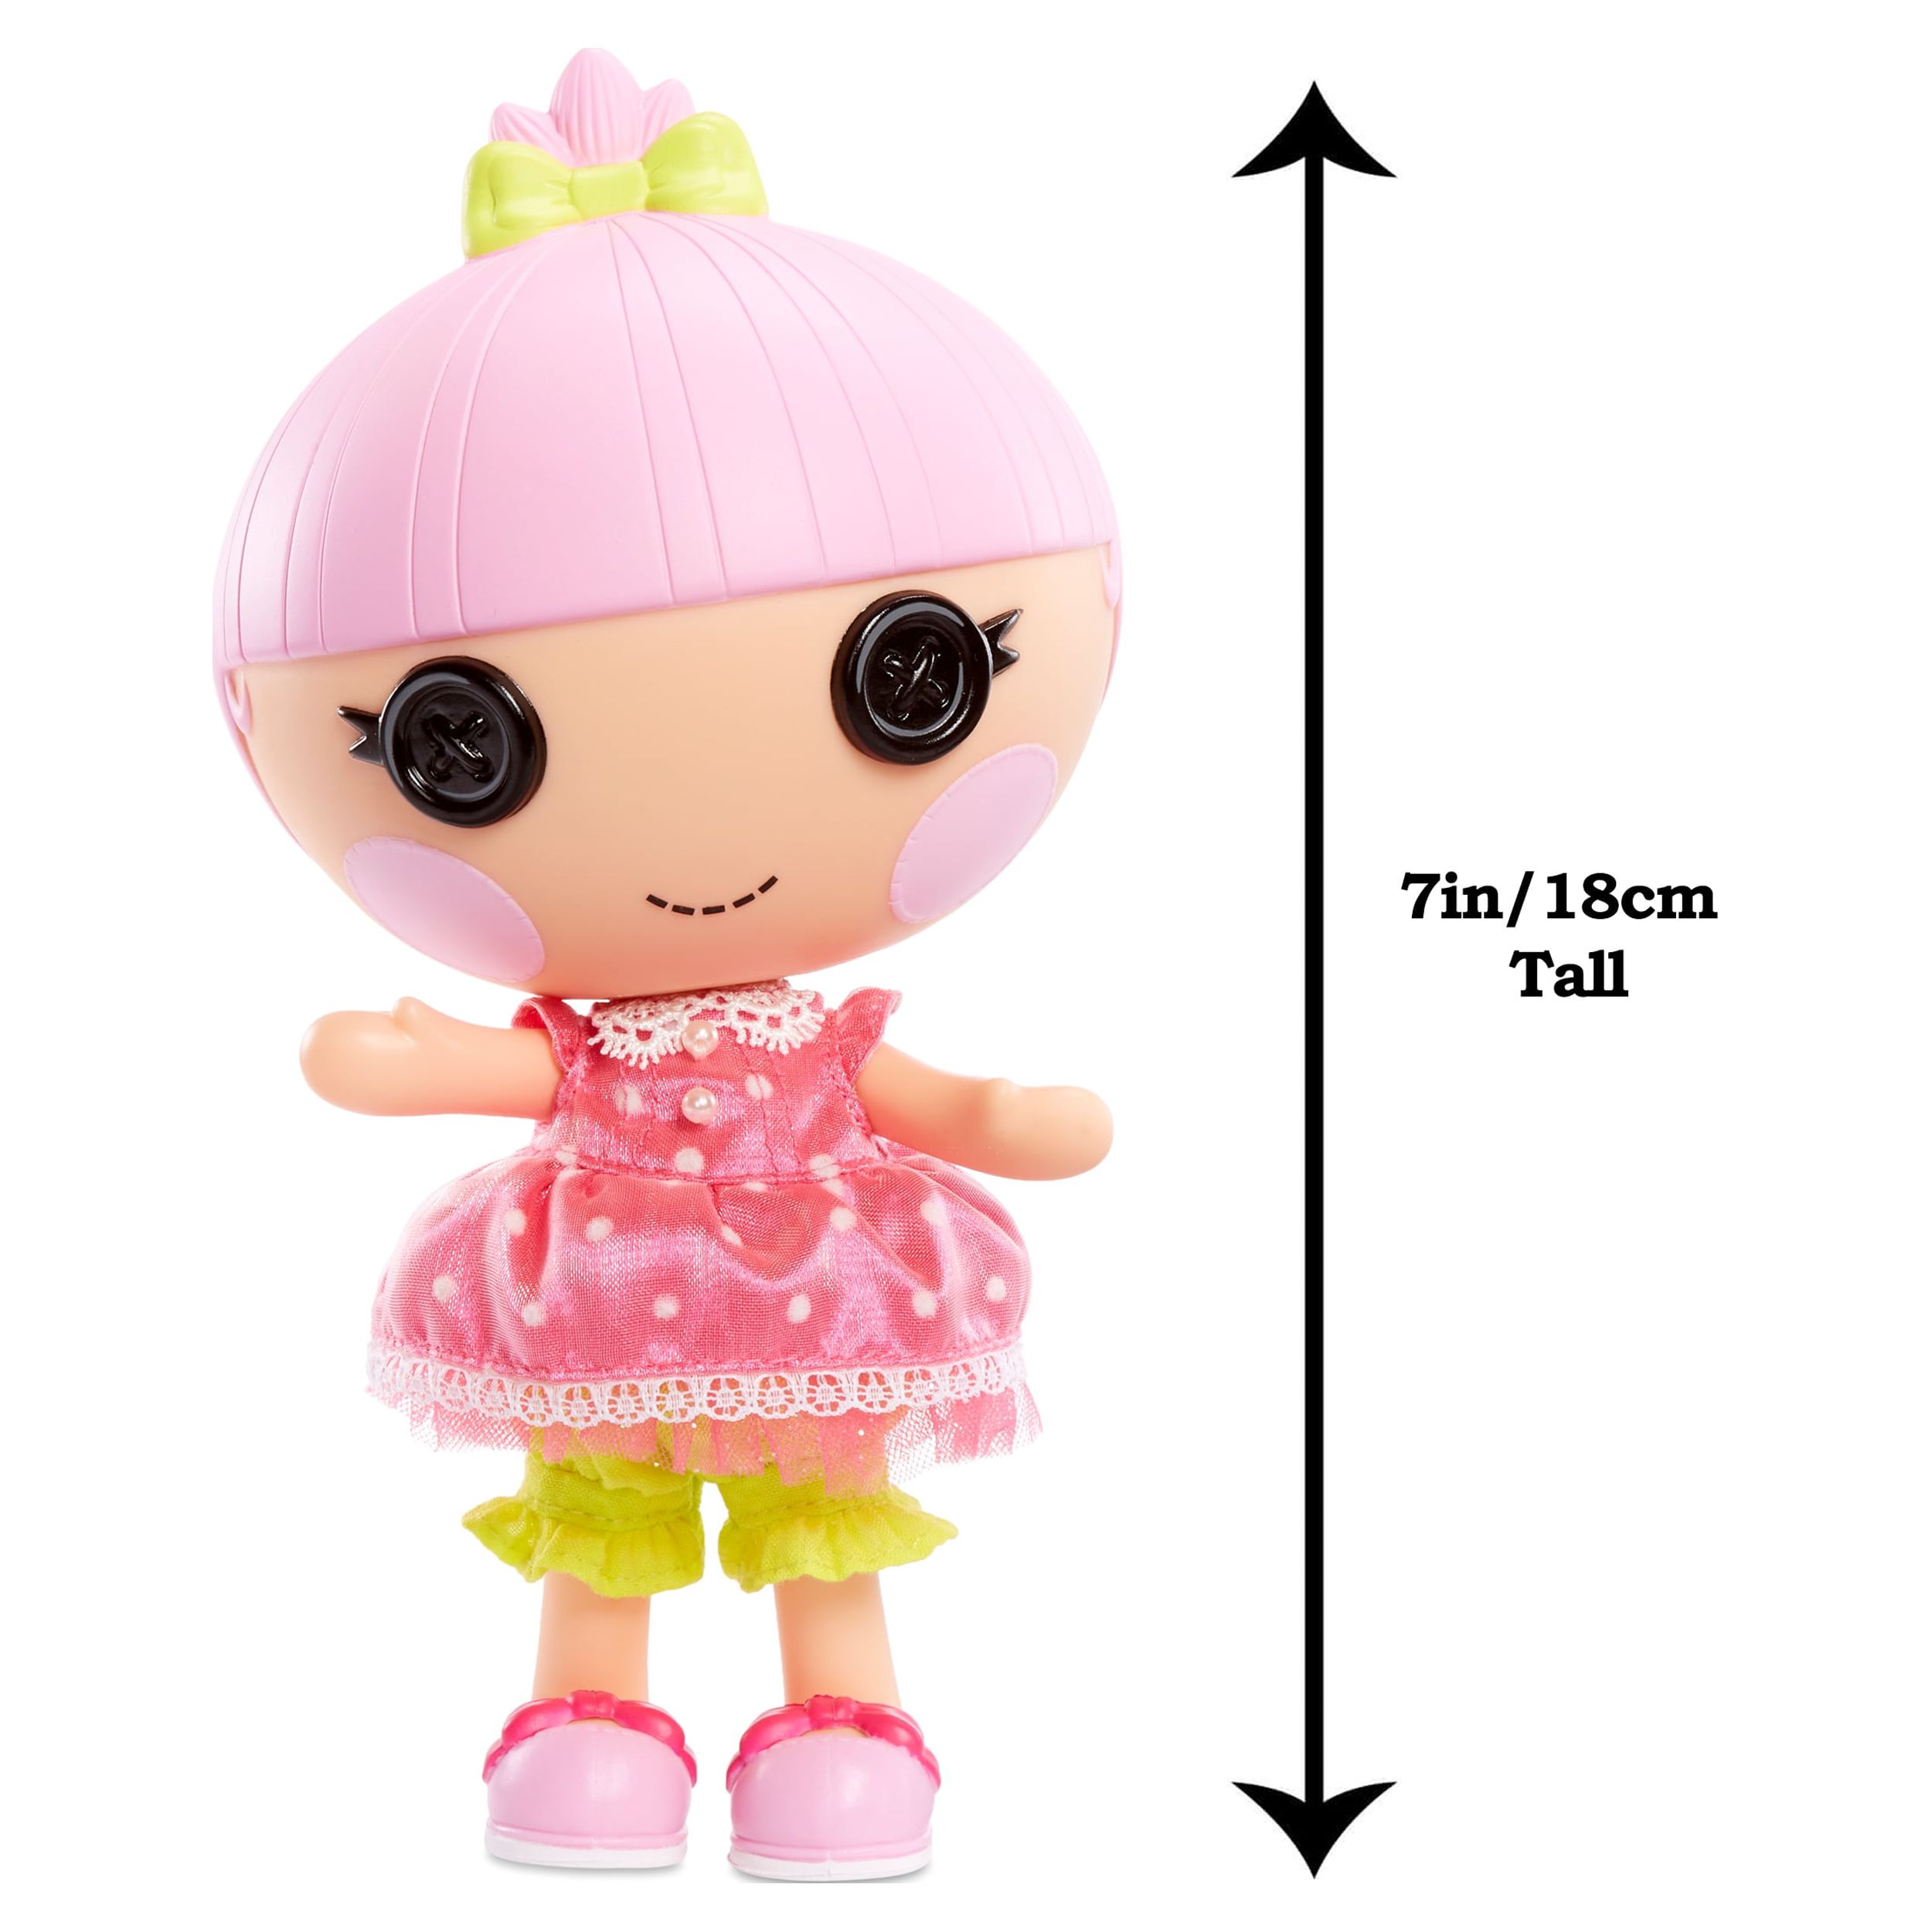 Lalaloopsy Littles Doll Trinket Sparkles and Pet Kitten Playset, 7" Princess Doll With Changeable Pink Outfit and Shoes in Reusable Play House Package, Toys for Girls Ages 3 4 5+ to 103 - image 4 of 5